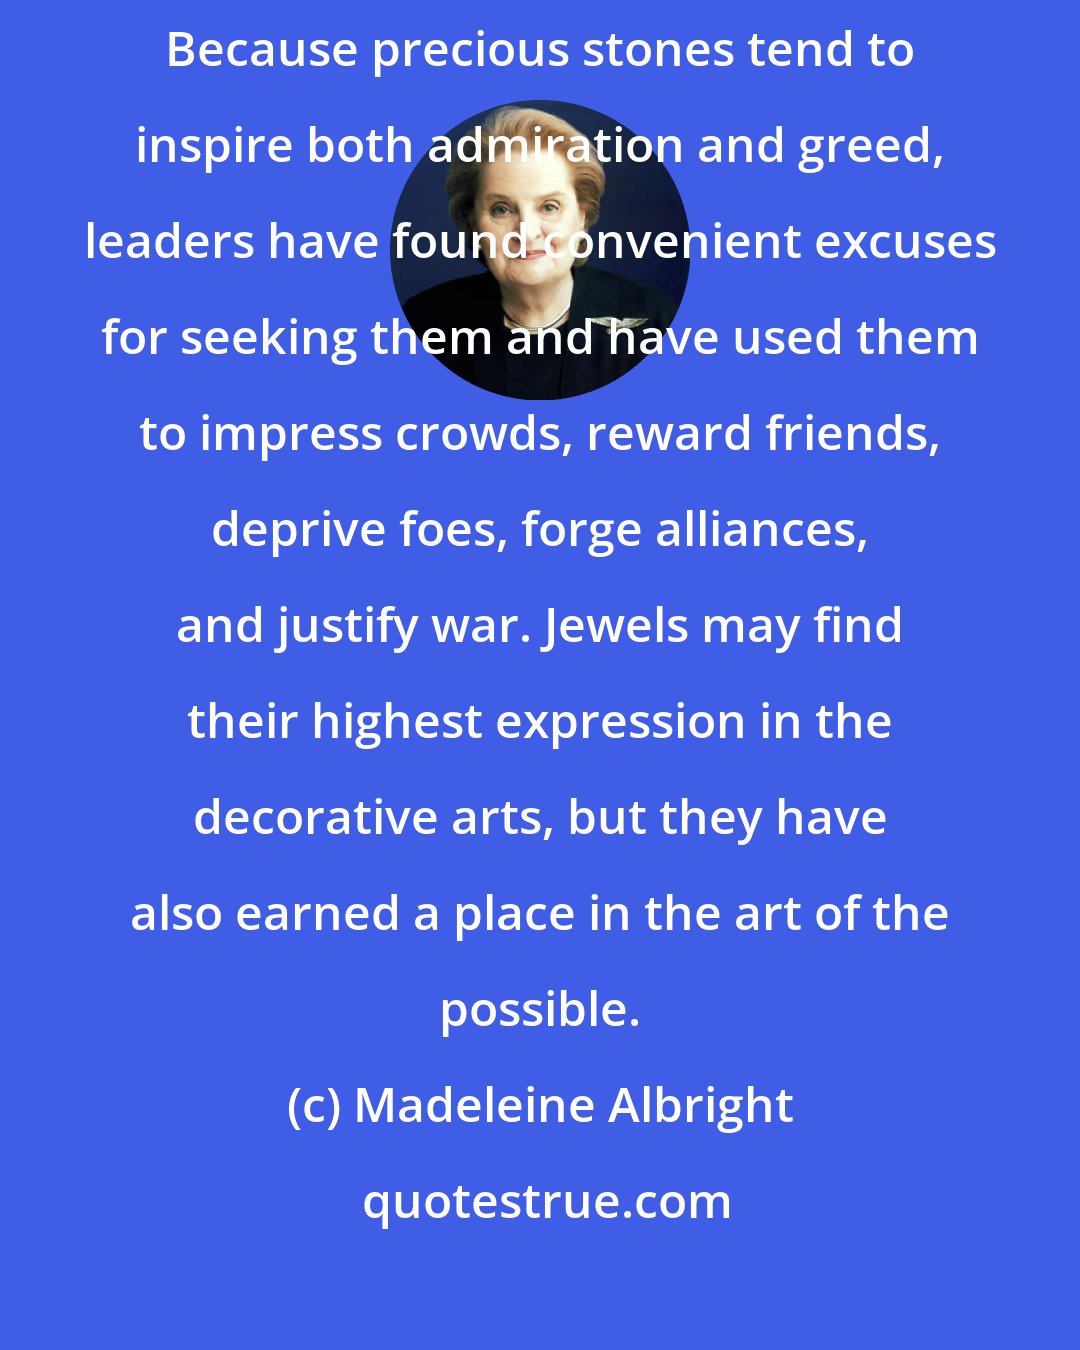 Madeleine Albright: jewels have played a colorful part in the evolution of world affairs. Because precious stones tend to inspire both admiration and greed, leaders have found convenient excuses for seeking them and have used them to impress crowds, reward friends, deprive foes, forge alliances, and justify war. Jewels may find their highest expression in the decorative arts, but they have also earned a place in the art of the possible.